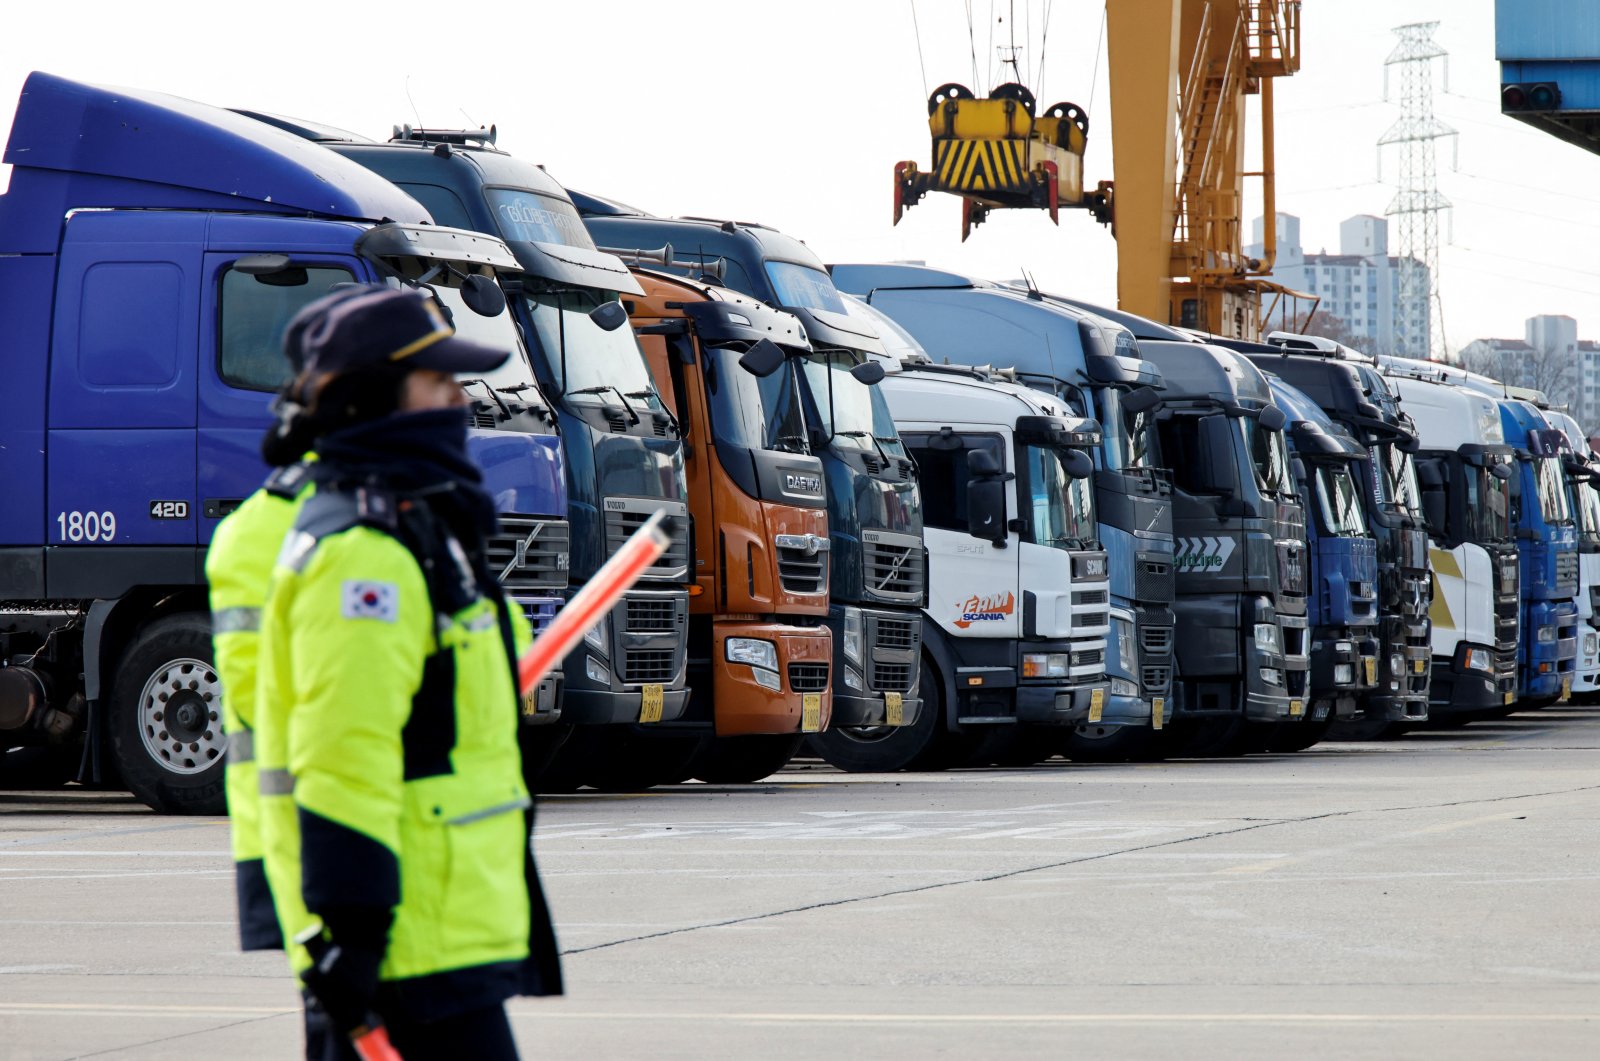 Police officers walk past a parked truck at a terminal of the Inland Container Depot in Uiwang, South Korea, Nov., 30, 2022. (Reuters Photo)